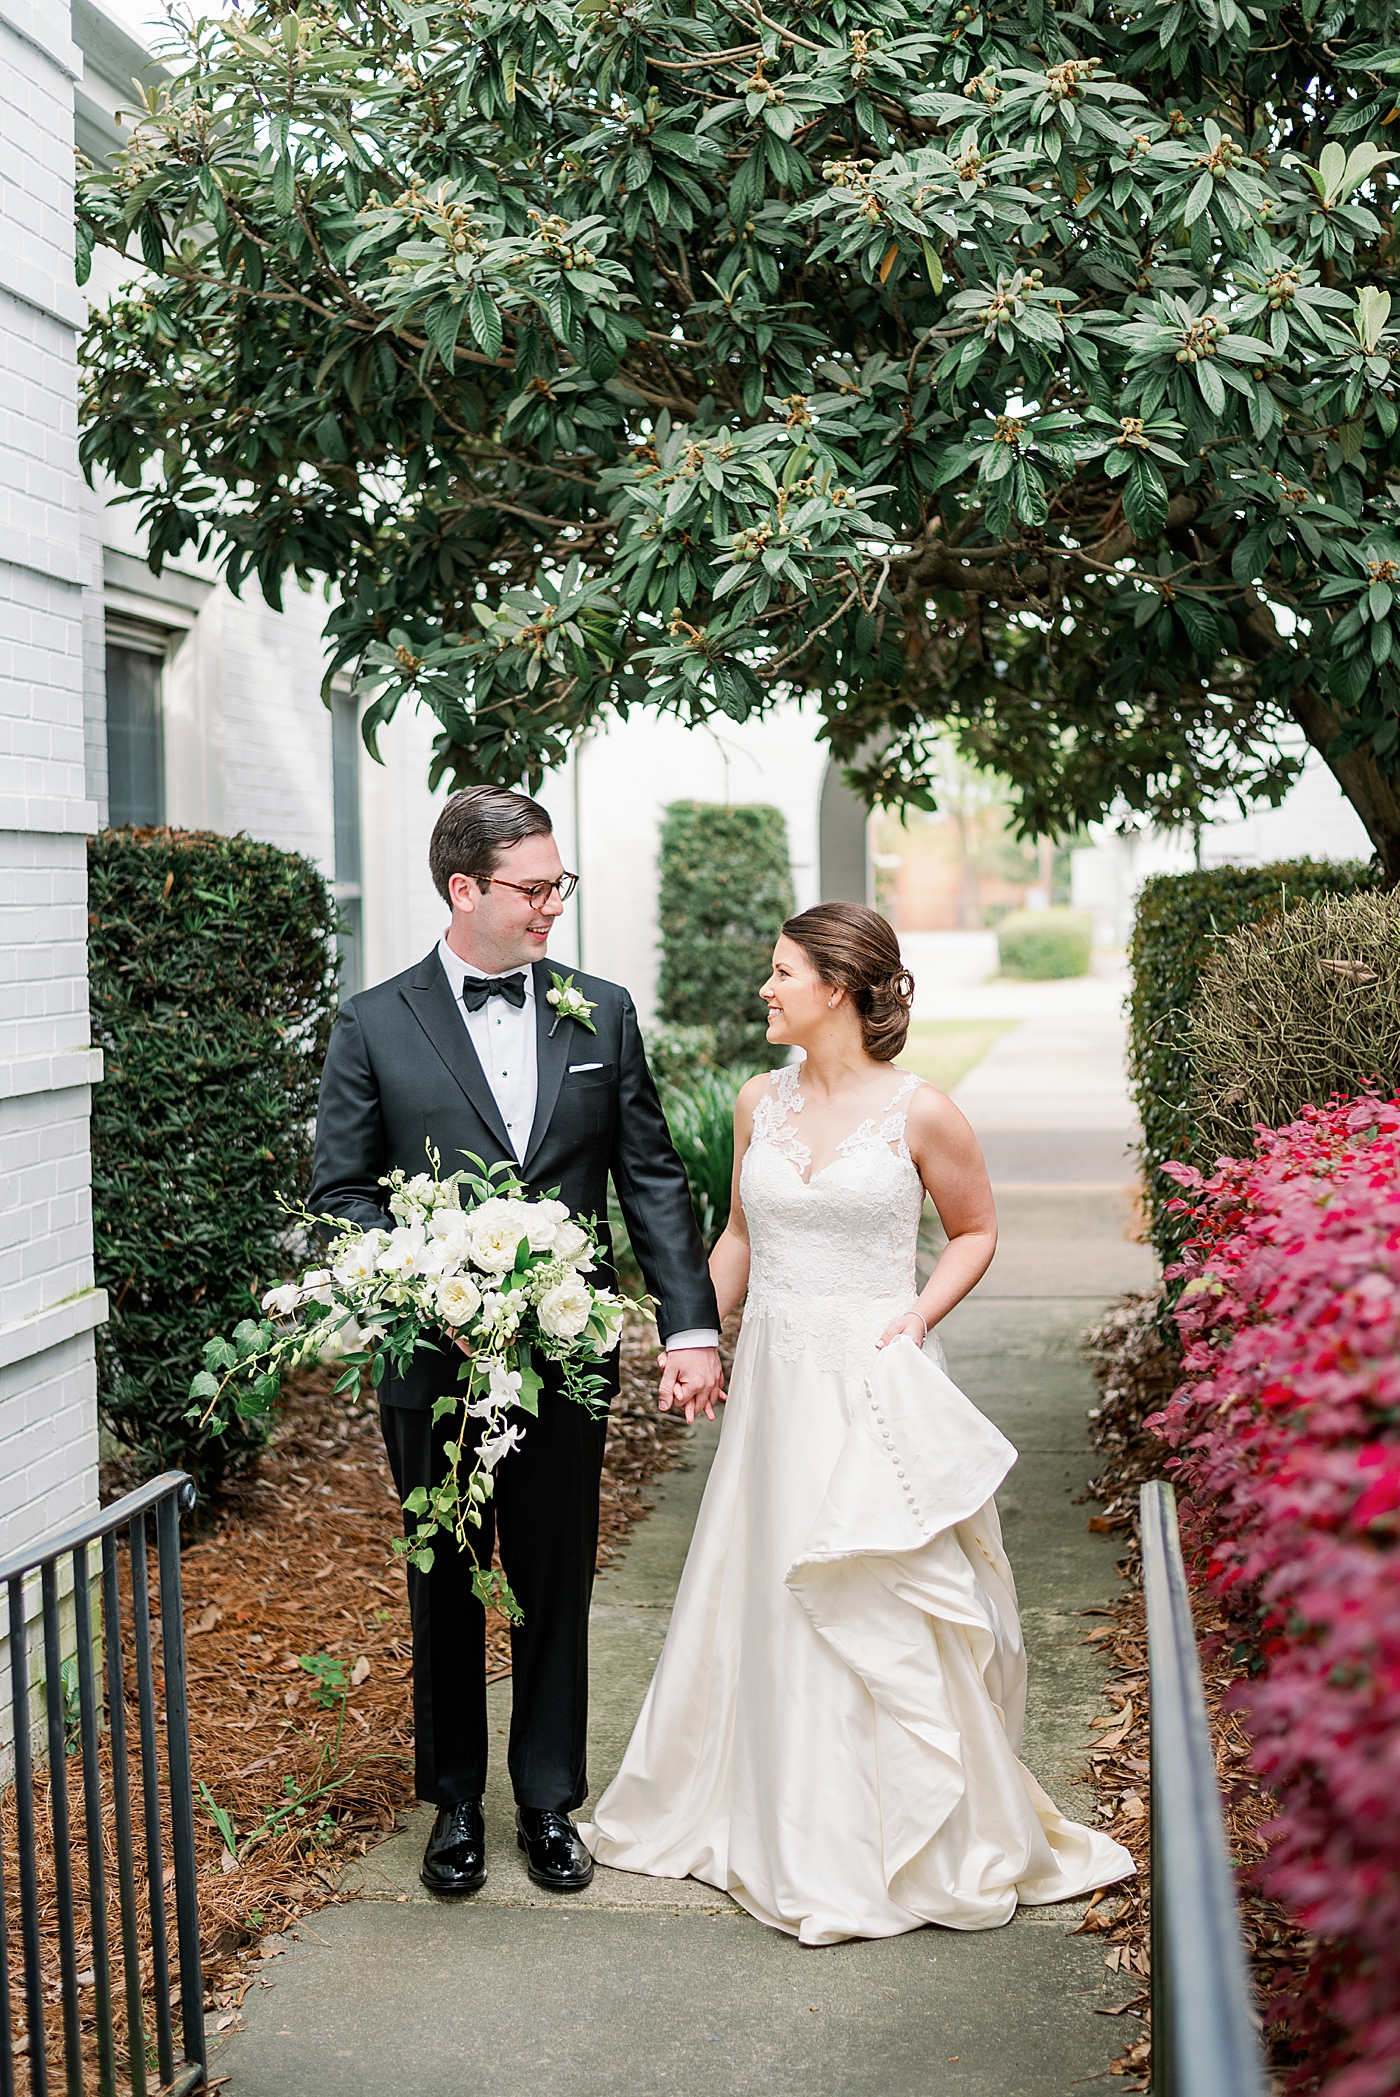 Bride and groom walking together on a sidewalk near a church | Photo by Annie Laura Photography